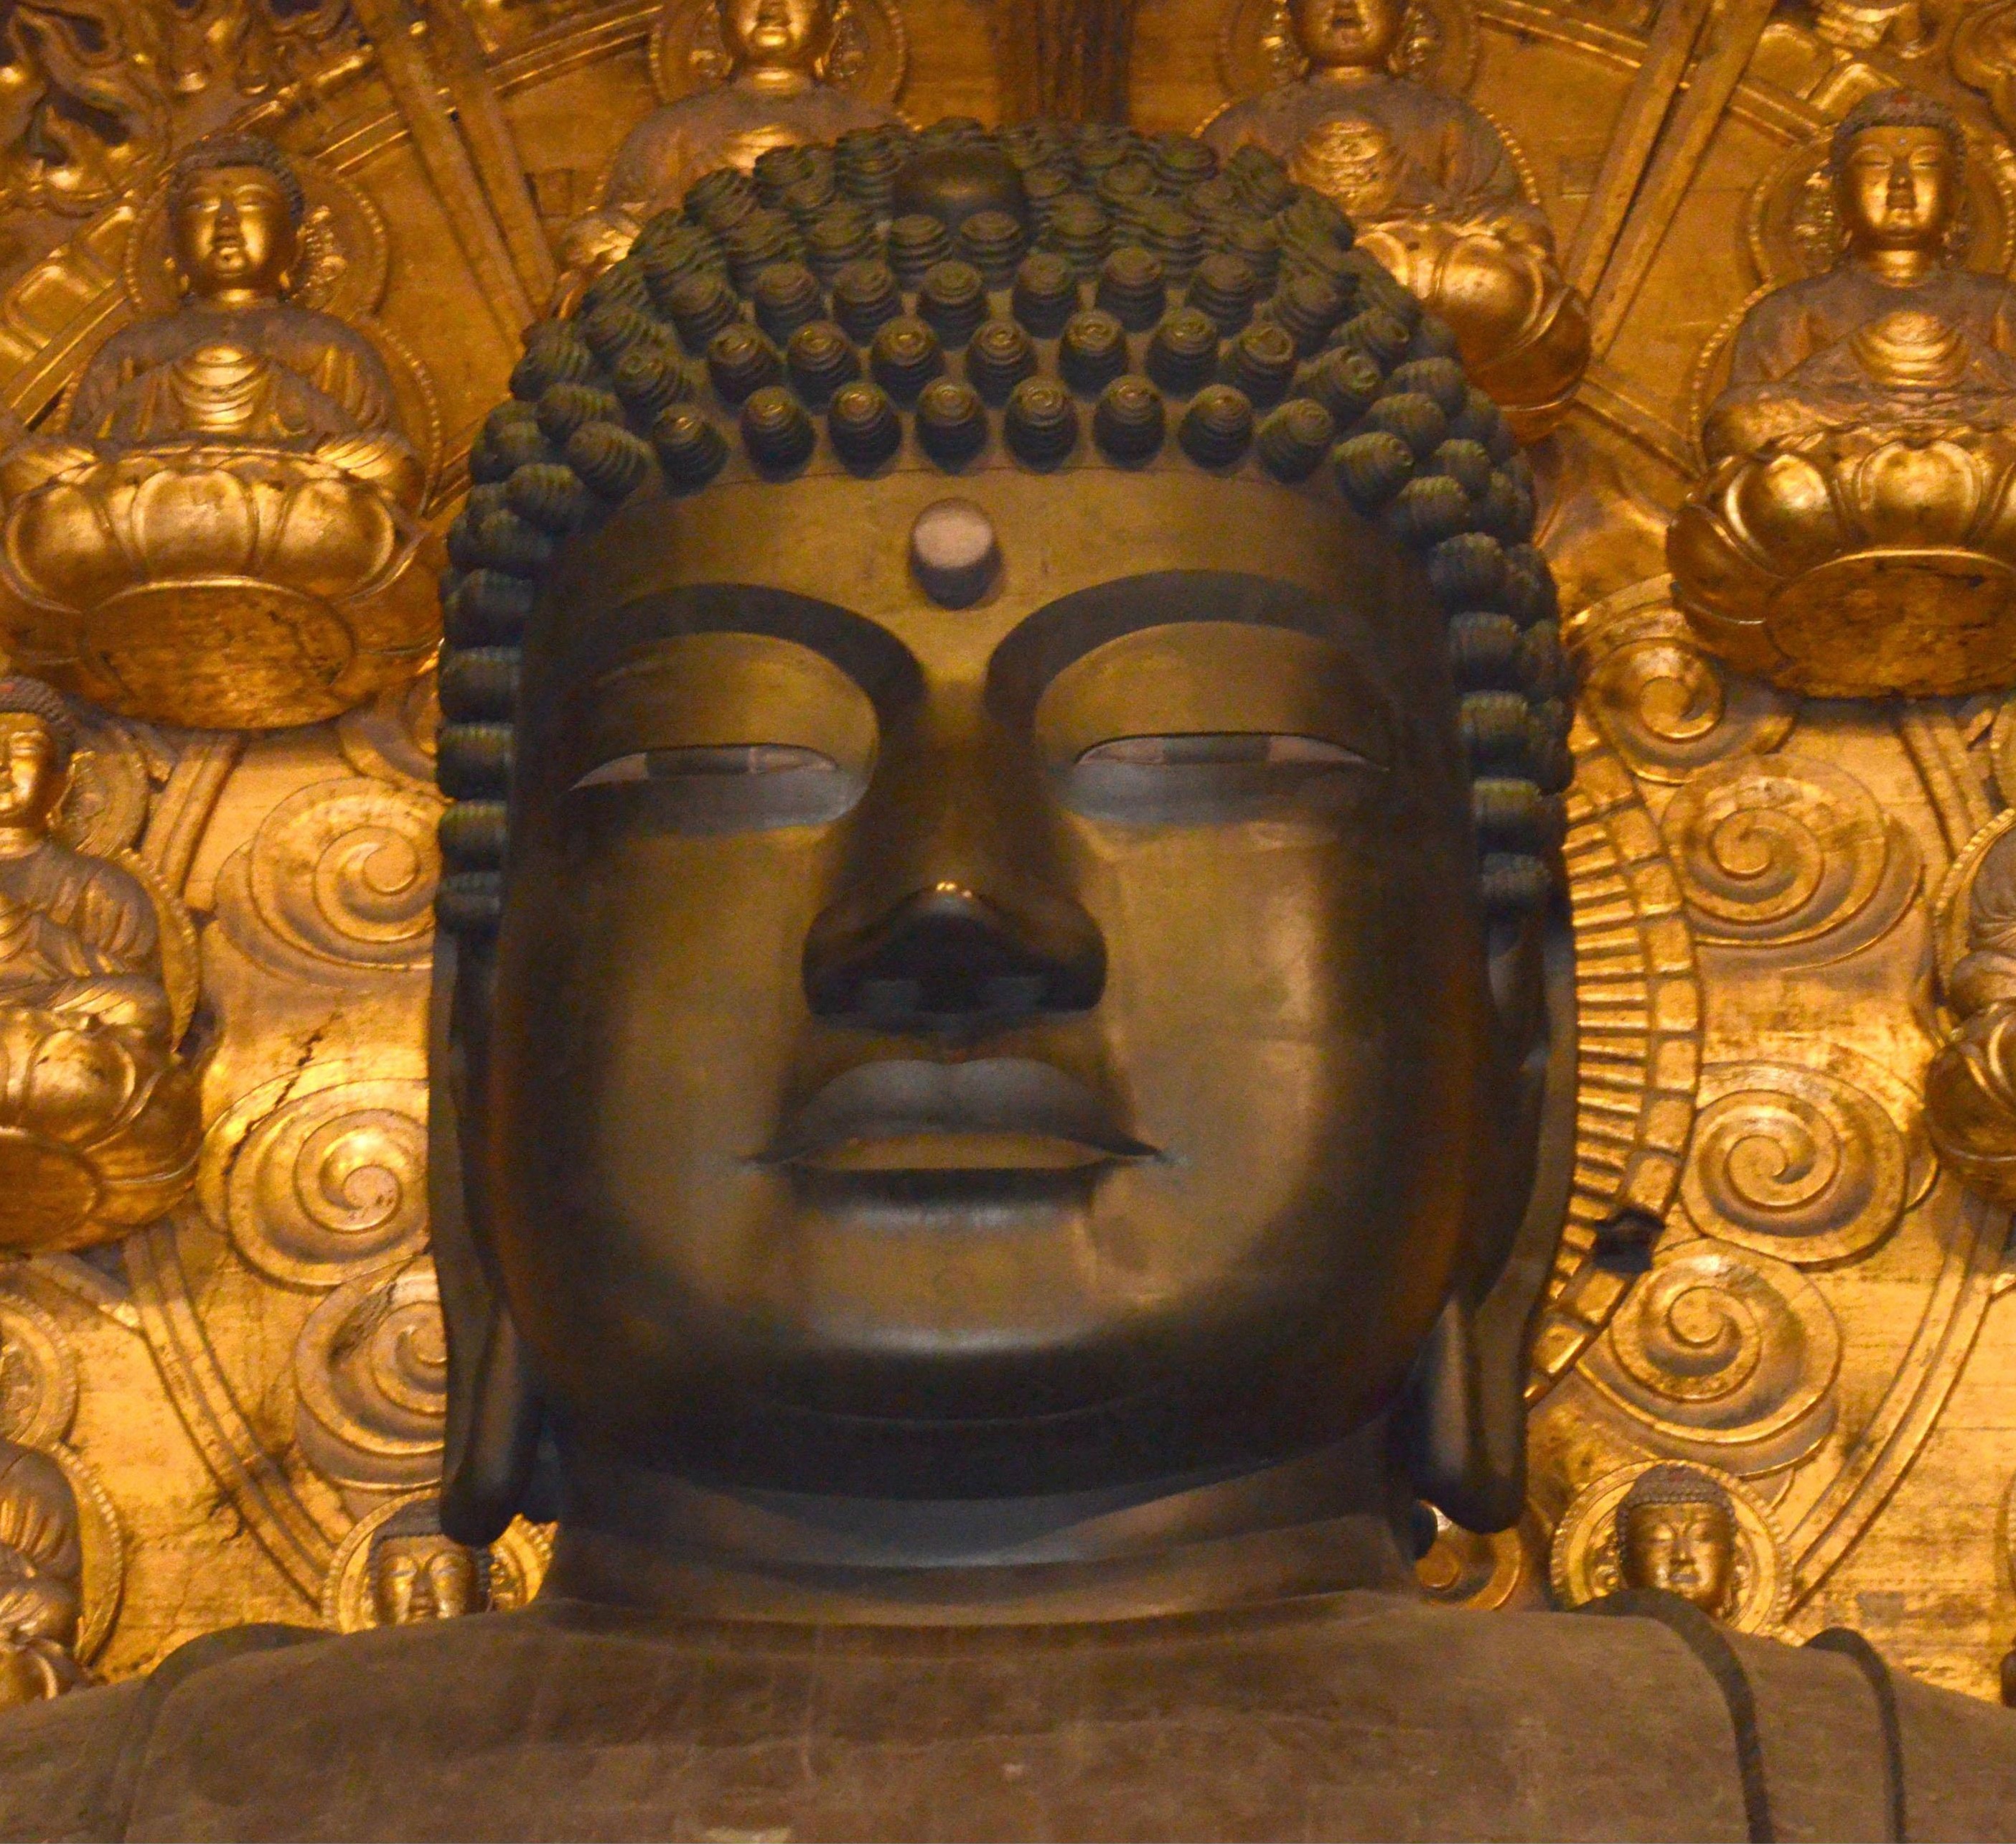 New research released Thursday shows that the Great Buddha of Nara has only half the number of spiraling curls of hair on its bronze head as are attributed to it in ancient documents. | KYODO